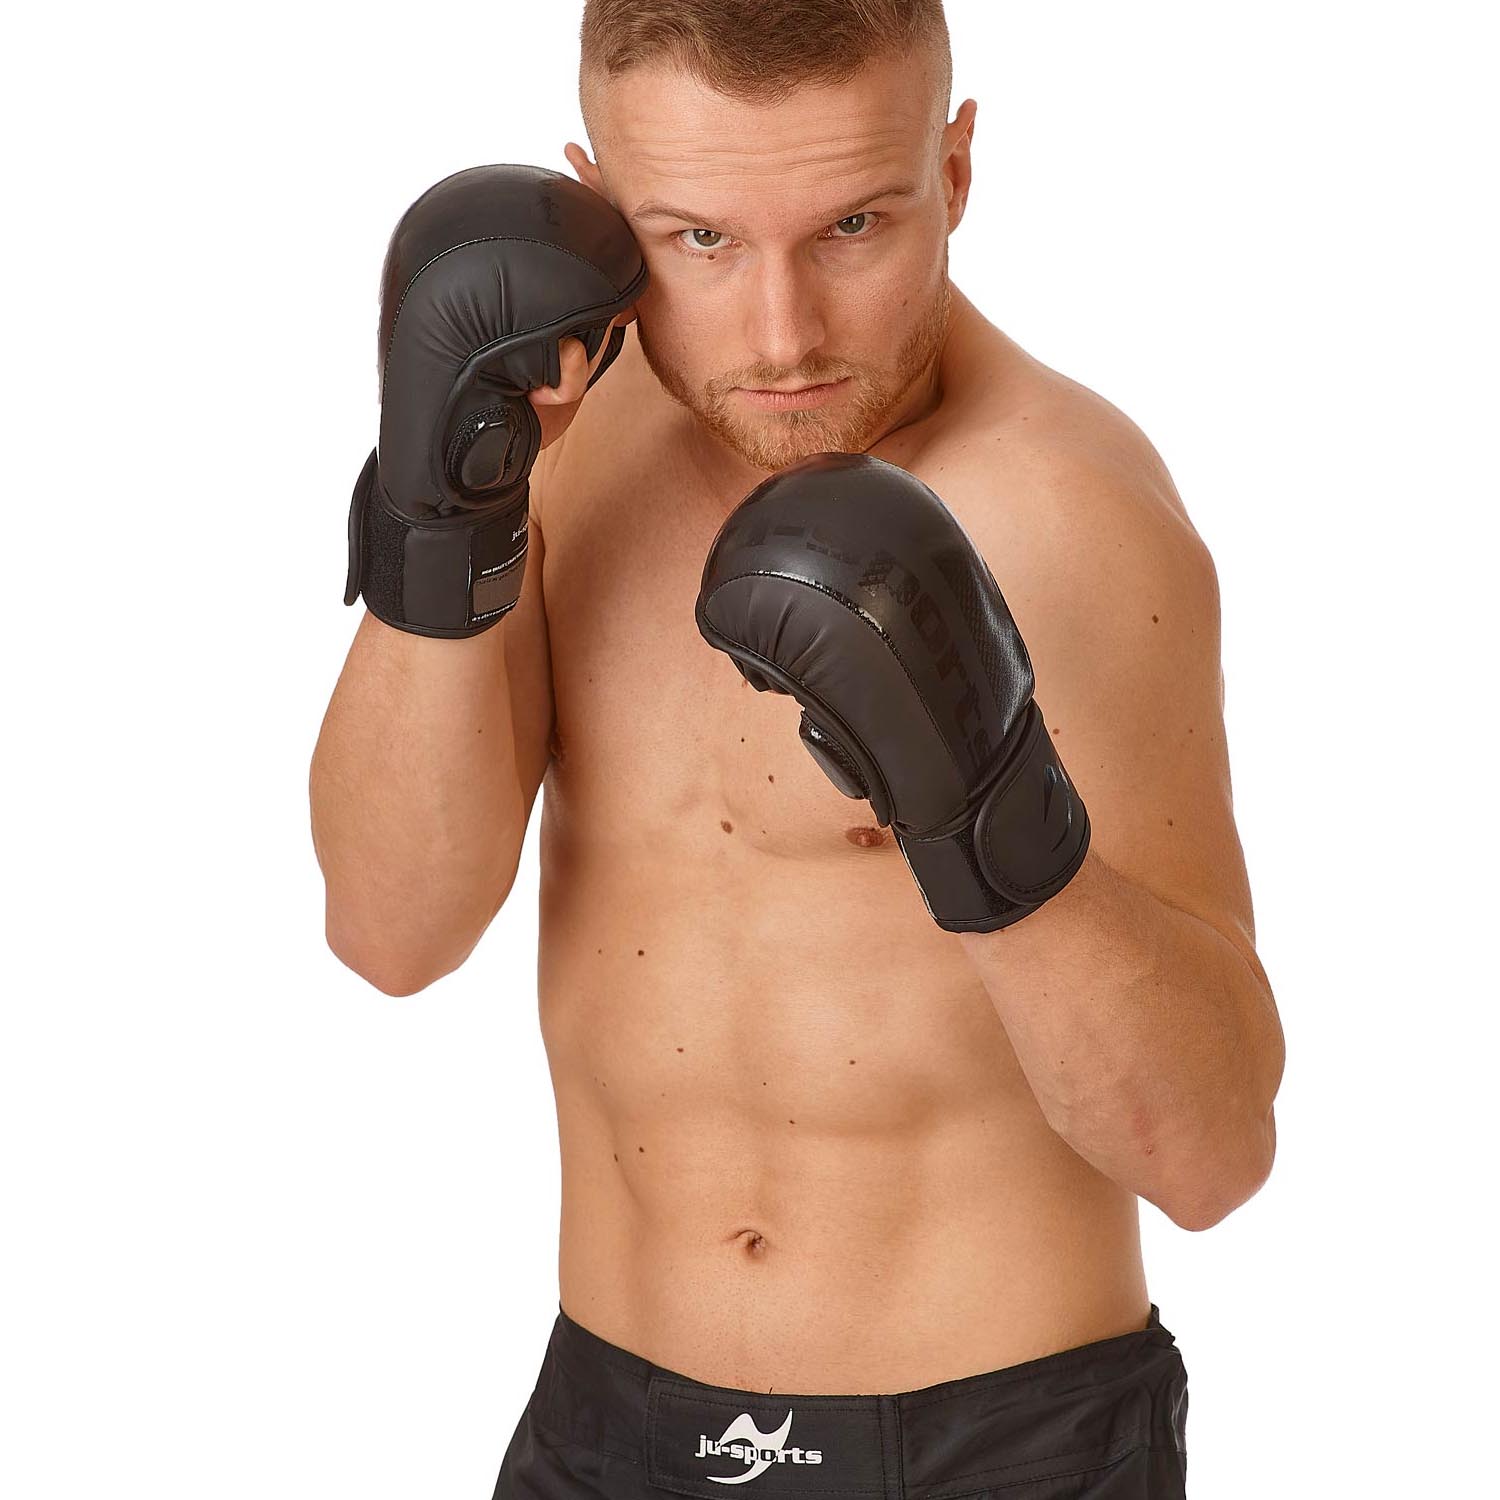 [Parallelimportgüter] Ju-Sports MMA Boxing Gloves, Carbon, black, | Assassin, 1000175-4 XL | XL